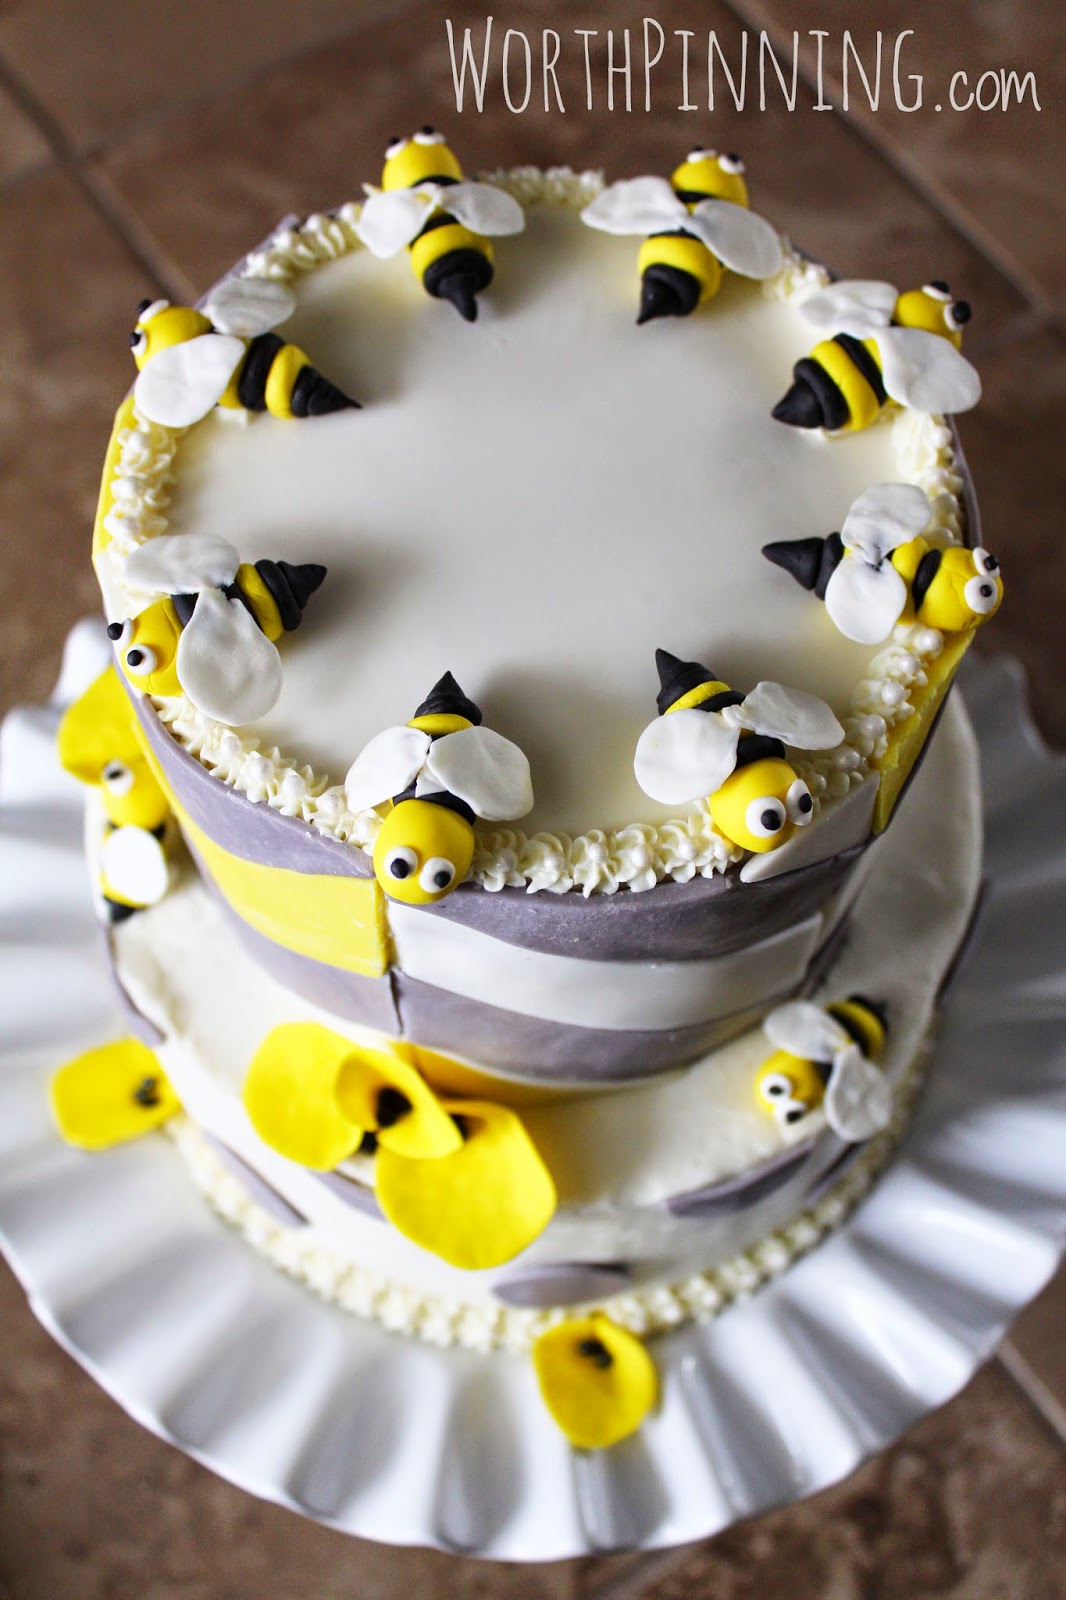 Worth Pinning: Bumble Bee Cake or Cupcake Toppers